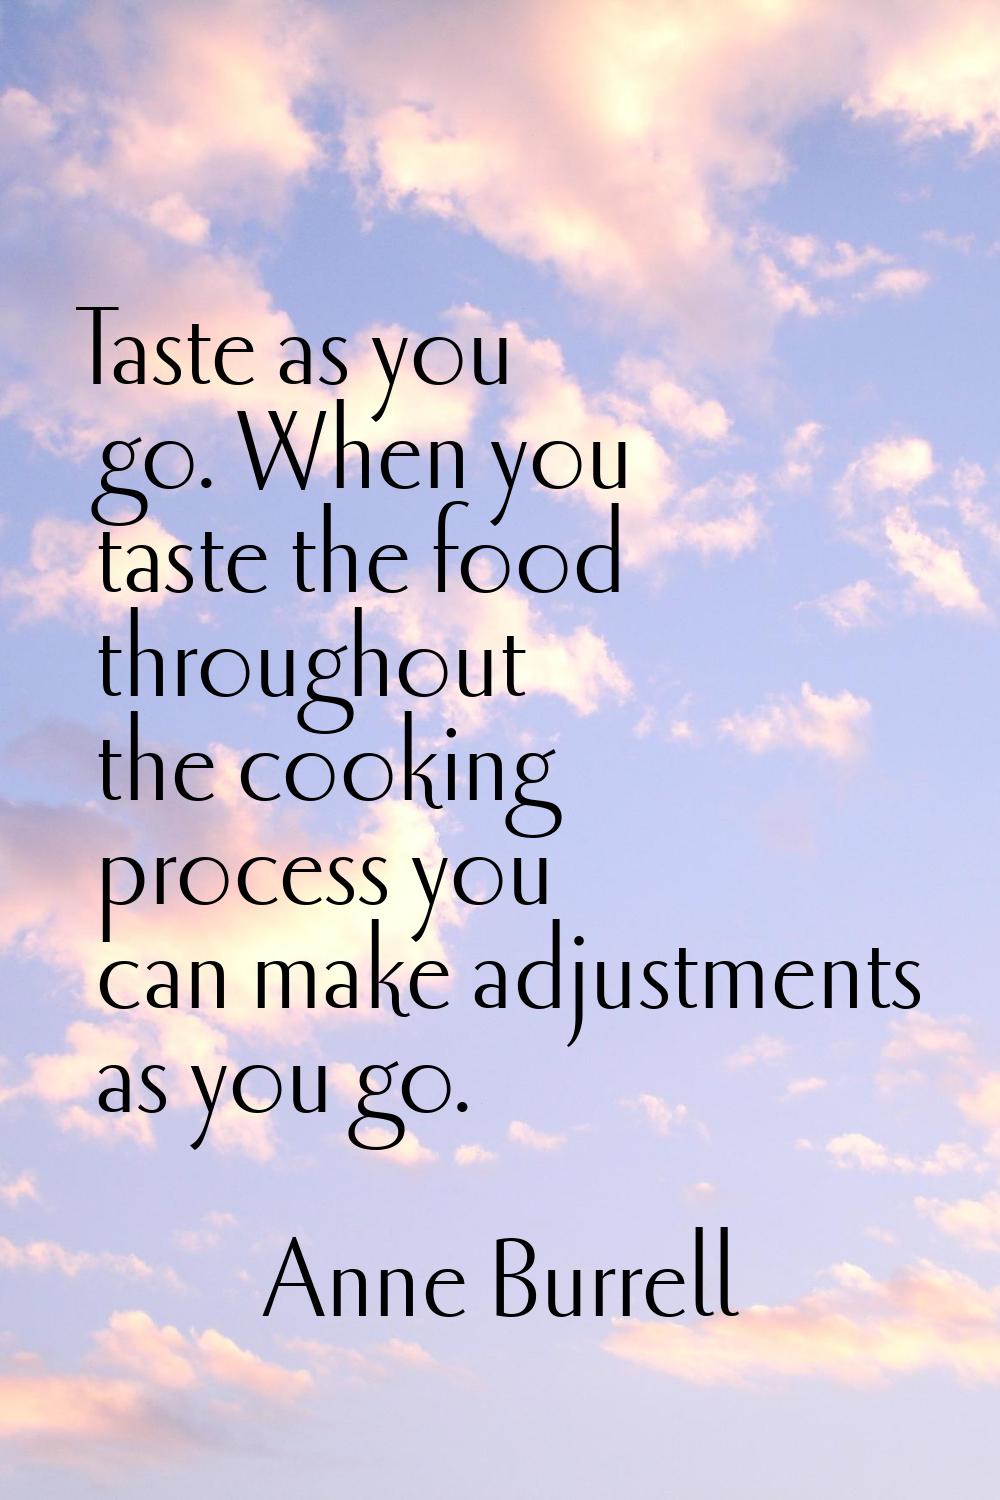 Taste as you go. When you taste the food throughout the cooking process you can make adjustments as